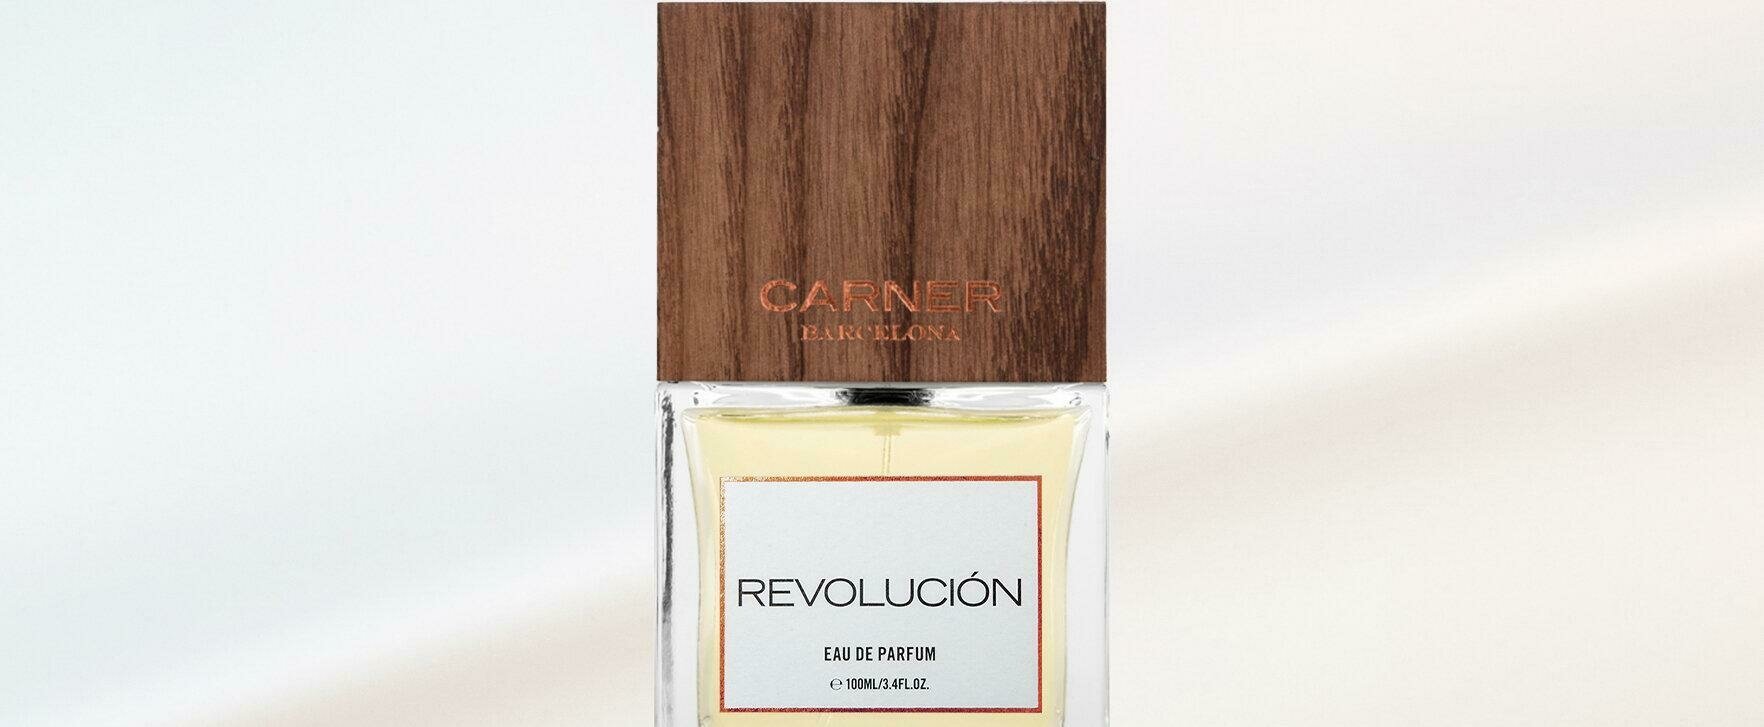 Inspired by the Industrial Revolution: "Revolución" by Carner 